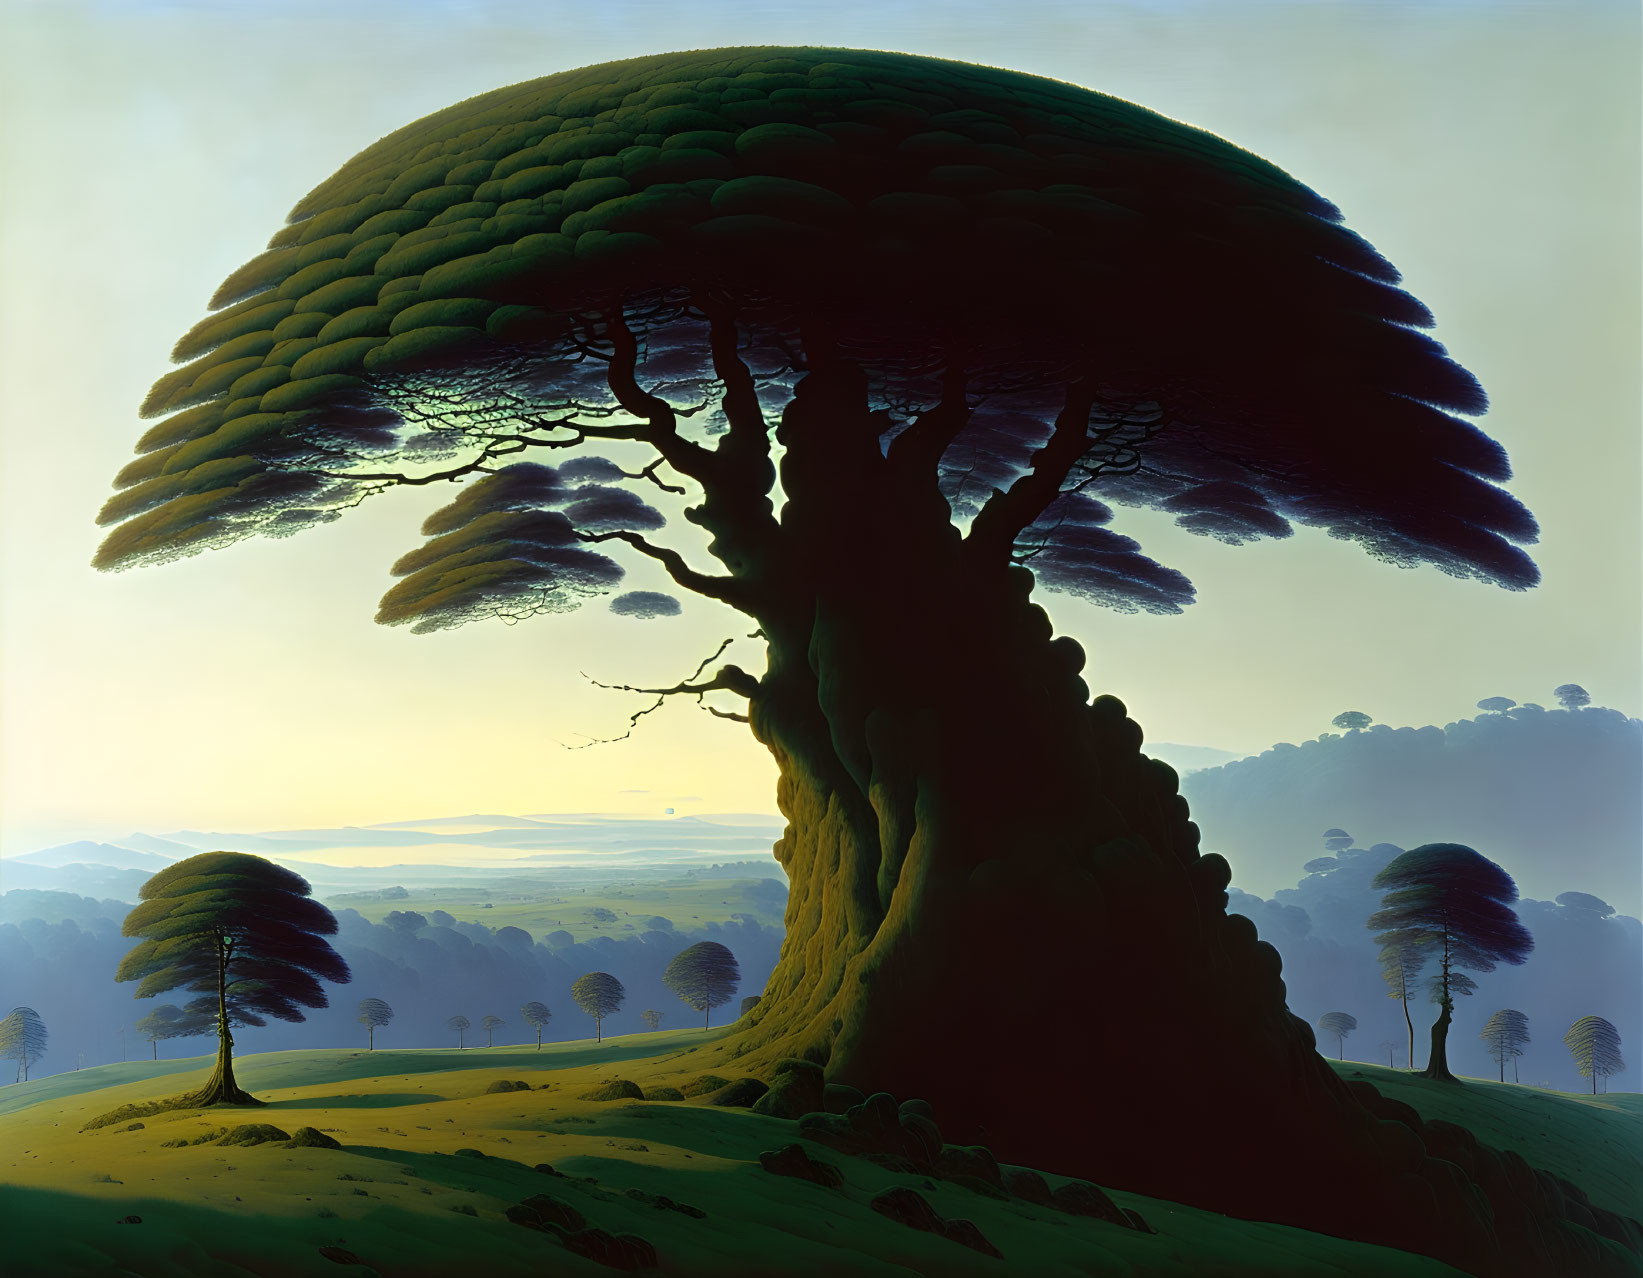 Surreal painting of oversized tree with mushroom-like canopy in landscape